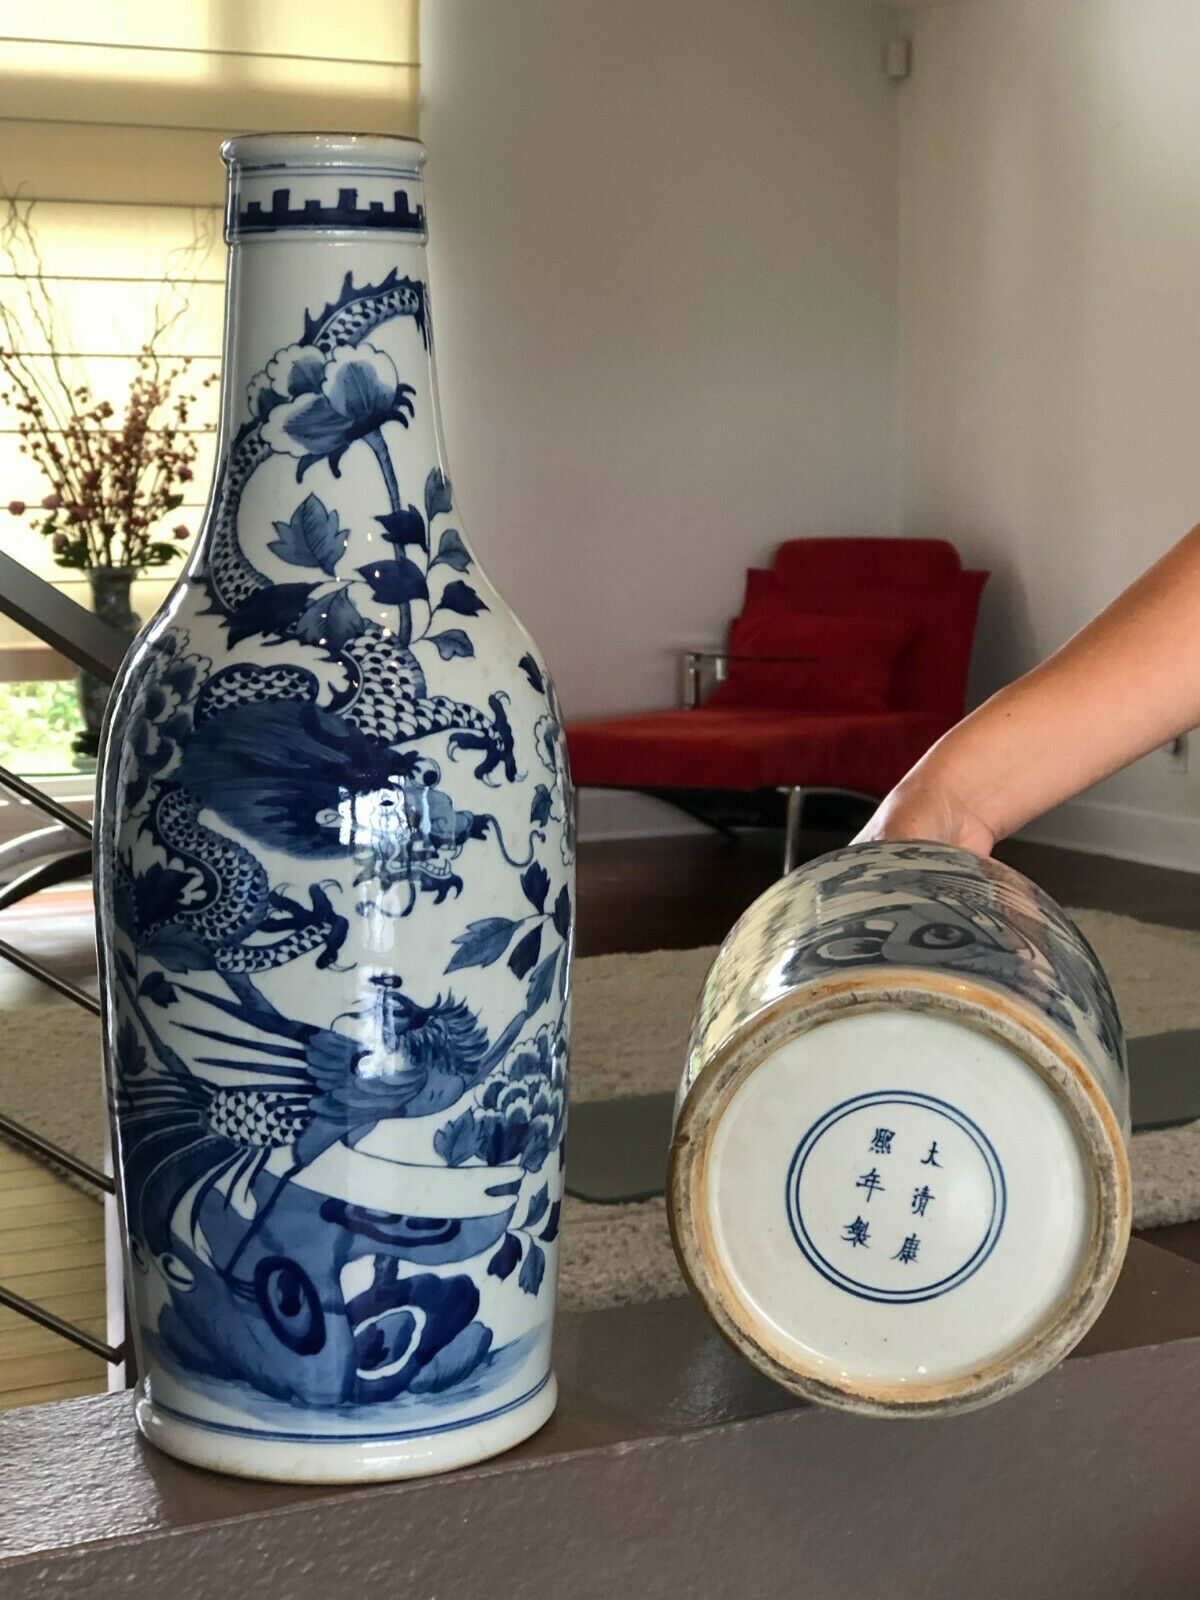 Chinese Antique Blue & White Large Vase (1 pair) “16” (H) #MD394